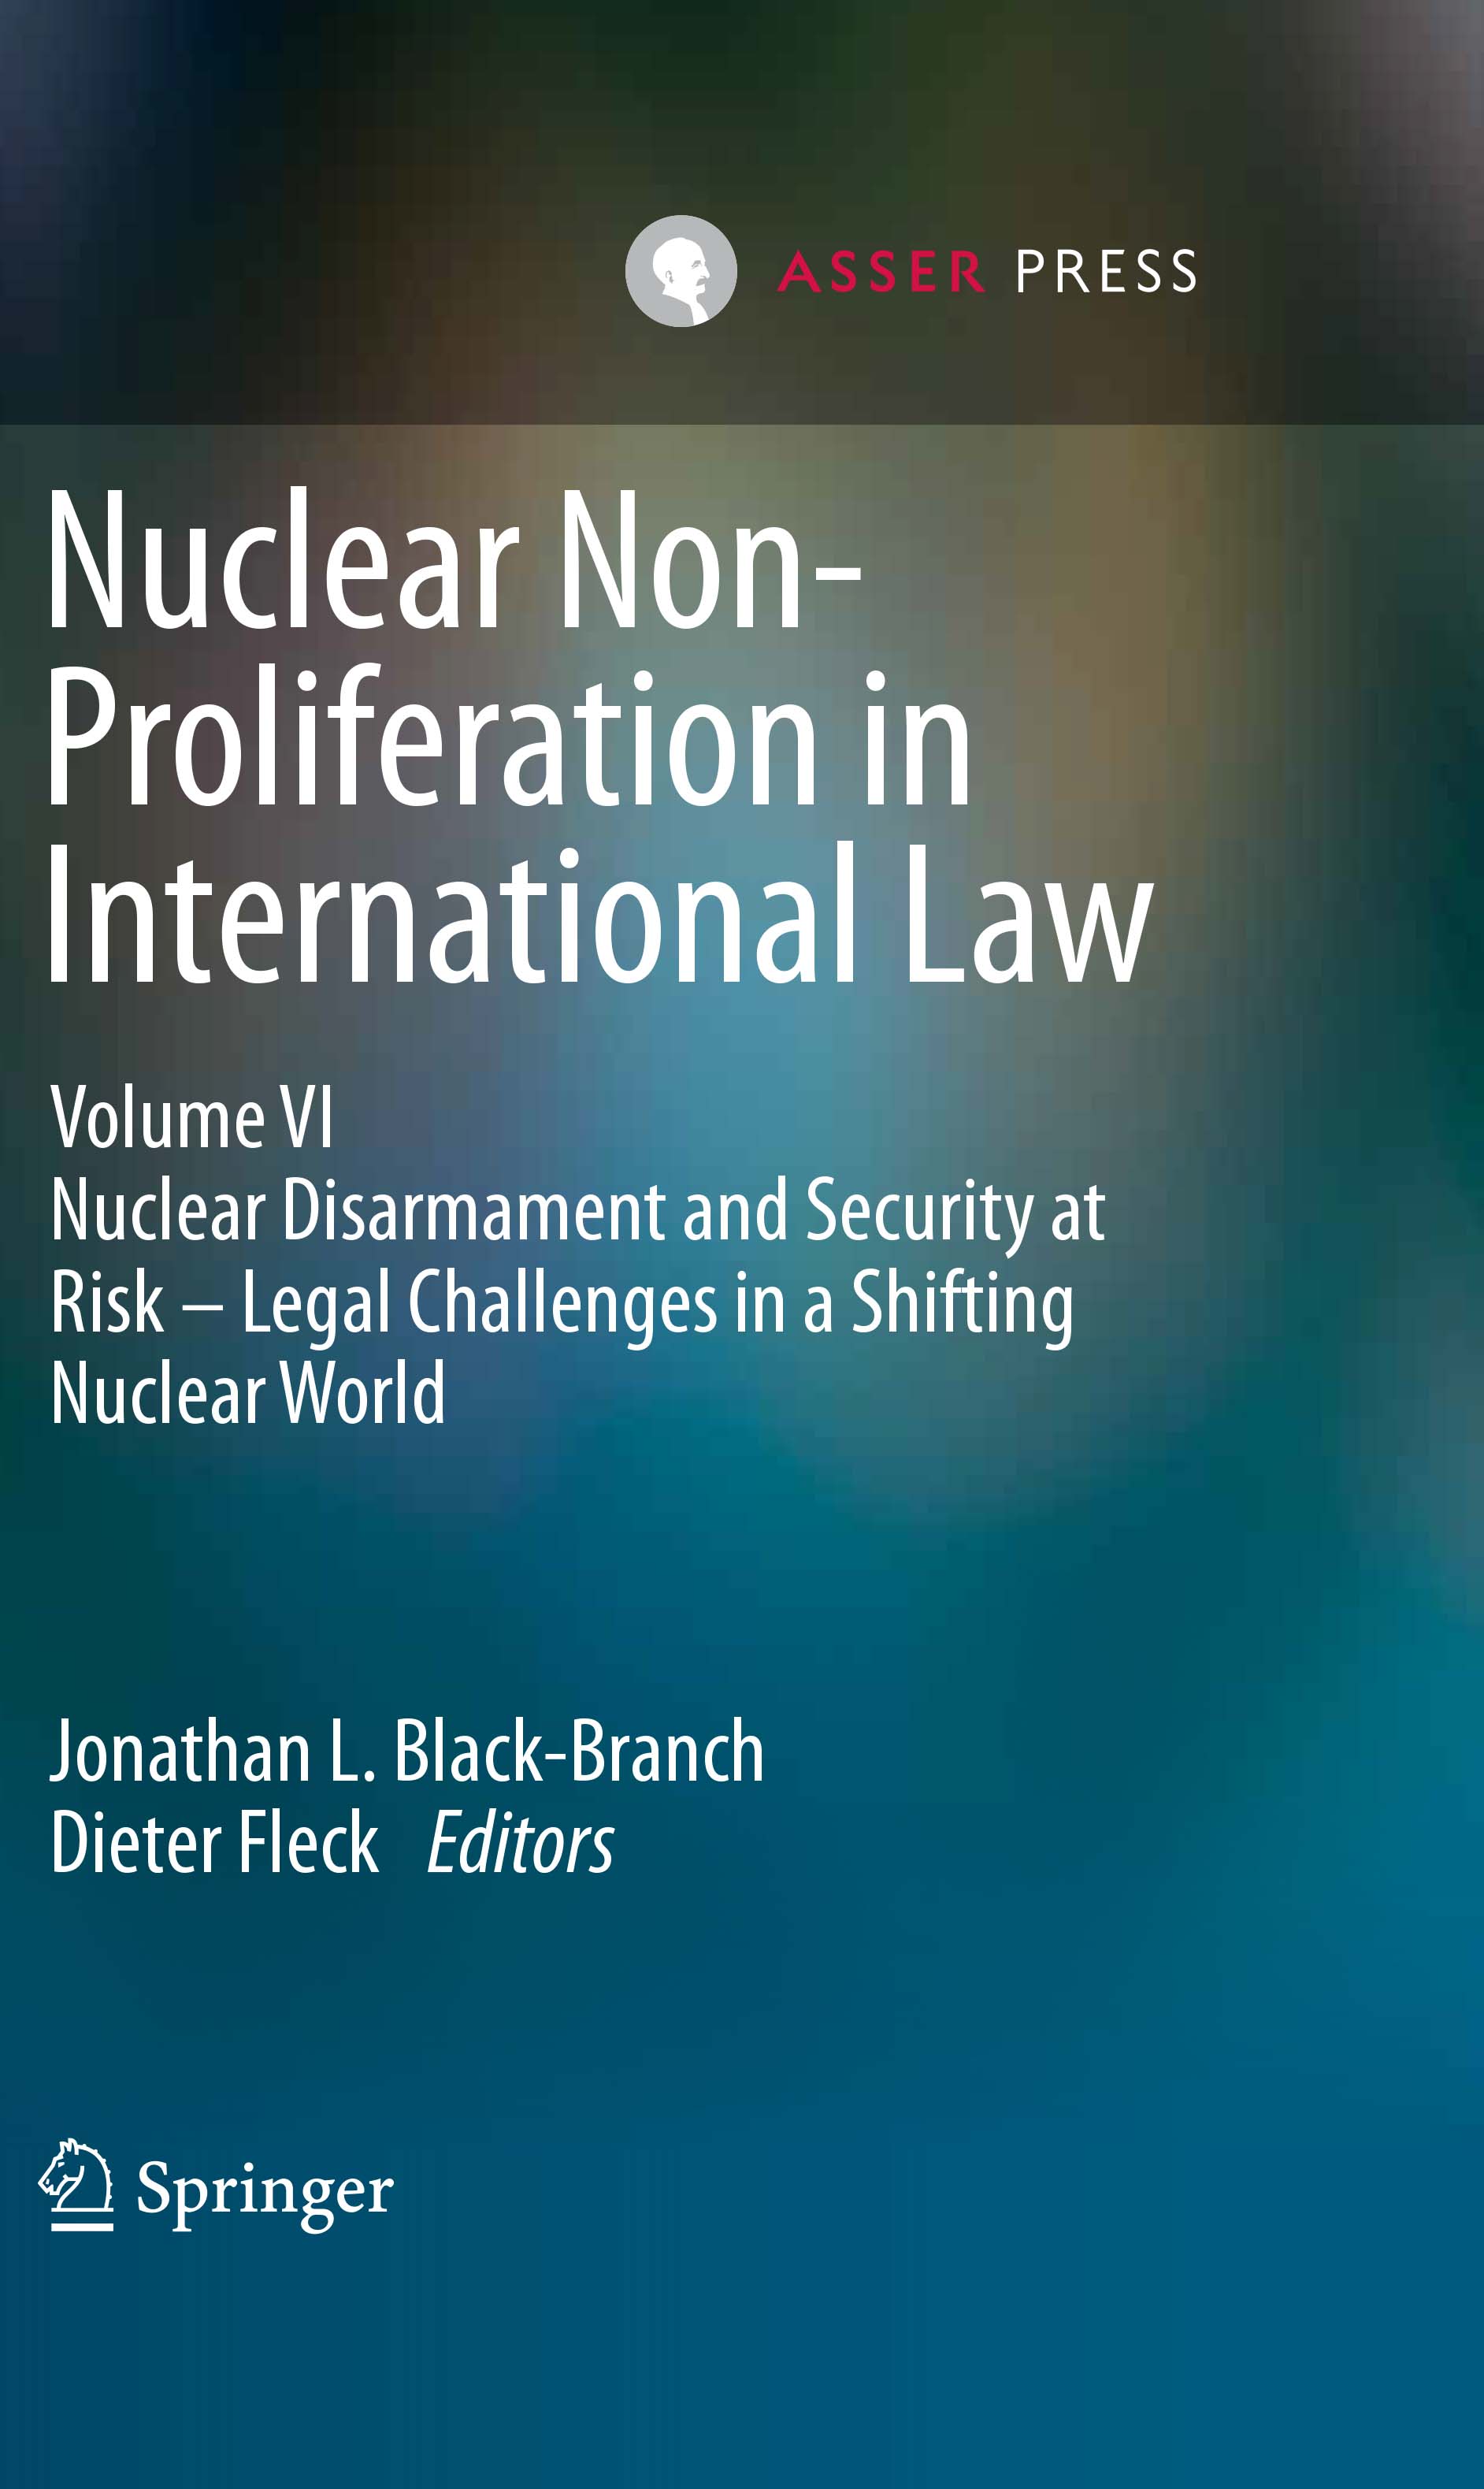 Nuclear Non-Proliferation in International Law - Volume VI - Nuclear Disarmament and Security at Risk – Legal Challenges in a Shifting Nuclear World